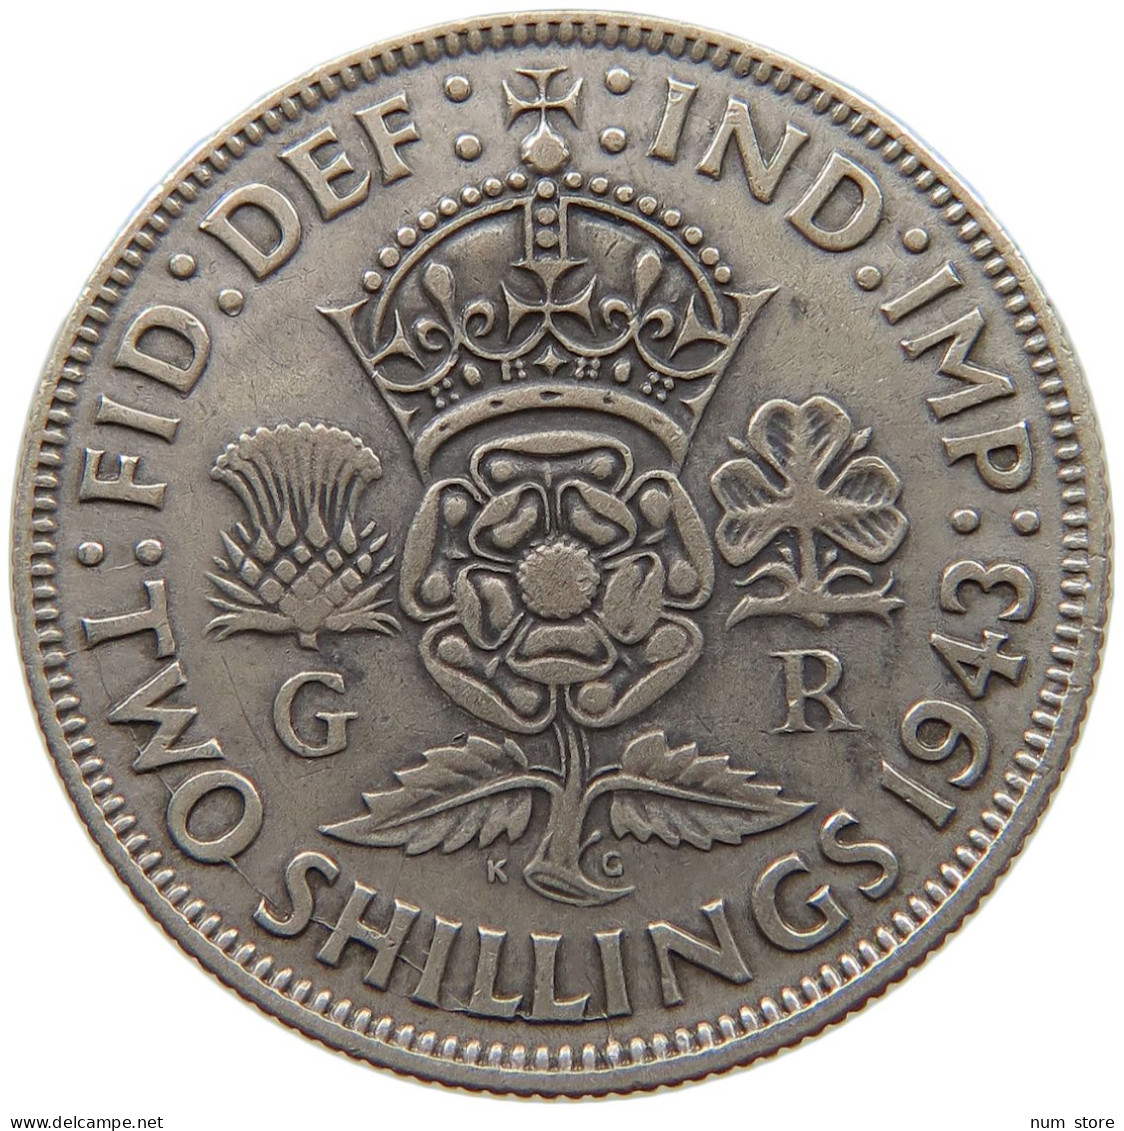 GREAT BRITAIN TWO SHILLINGS 1943 George VI. (1936-1952) #a082 0217 - J. 1 Florin / 2 Shillings